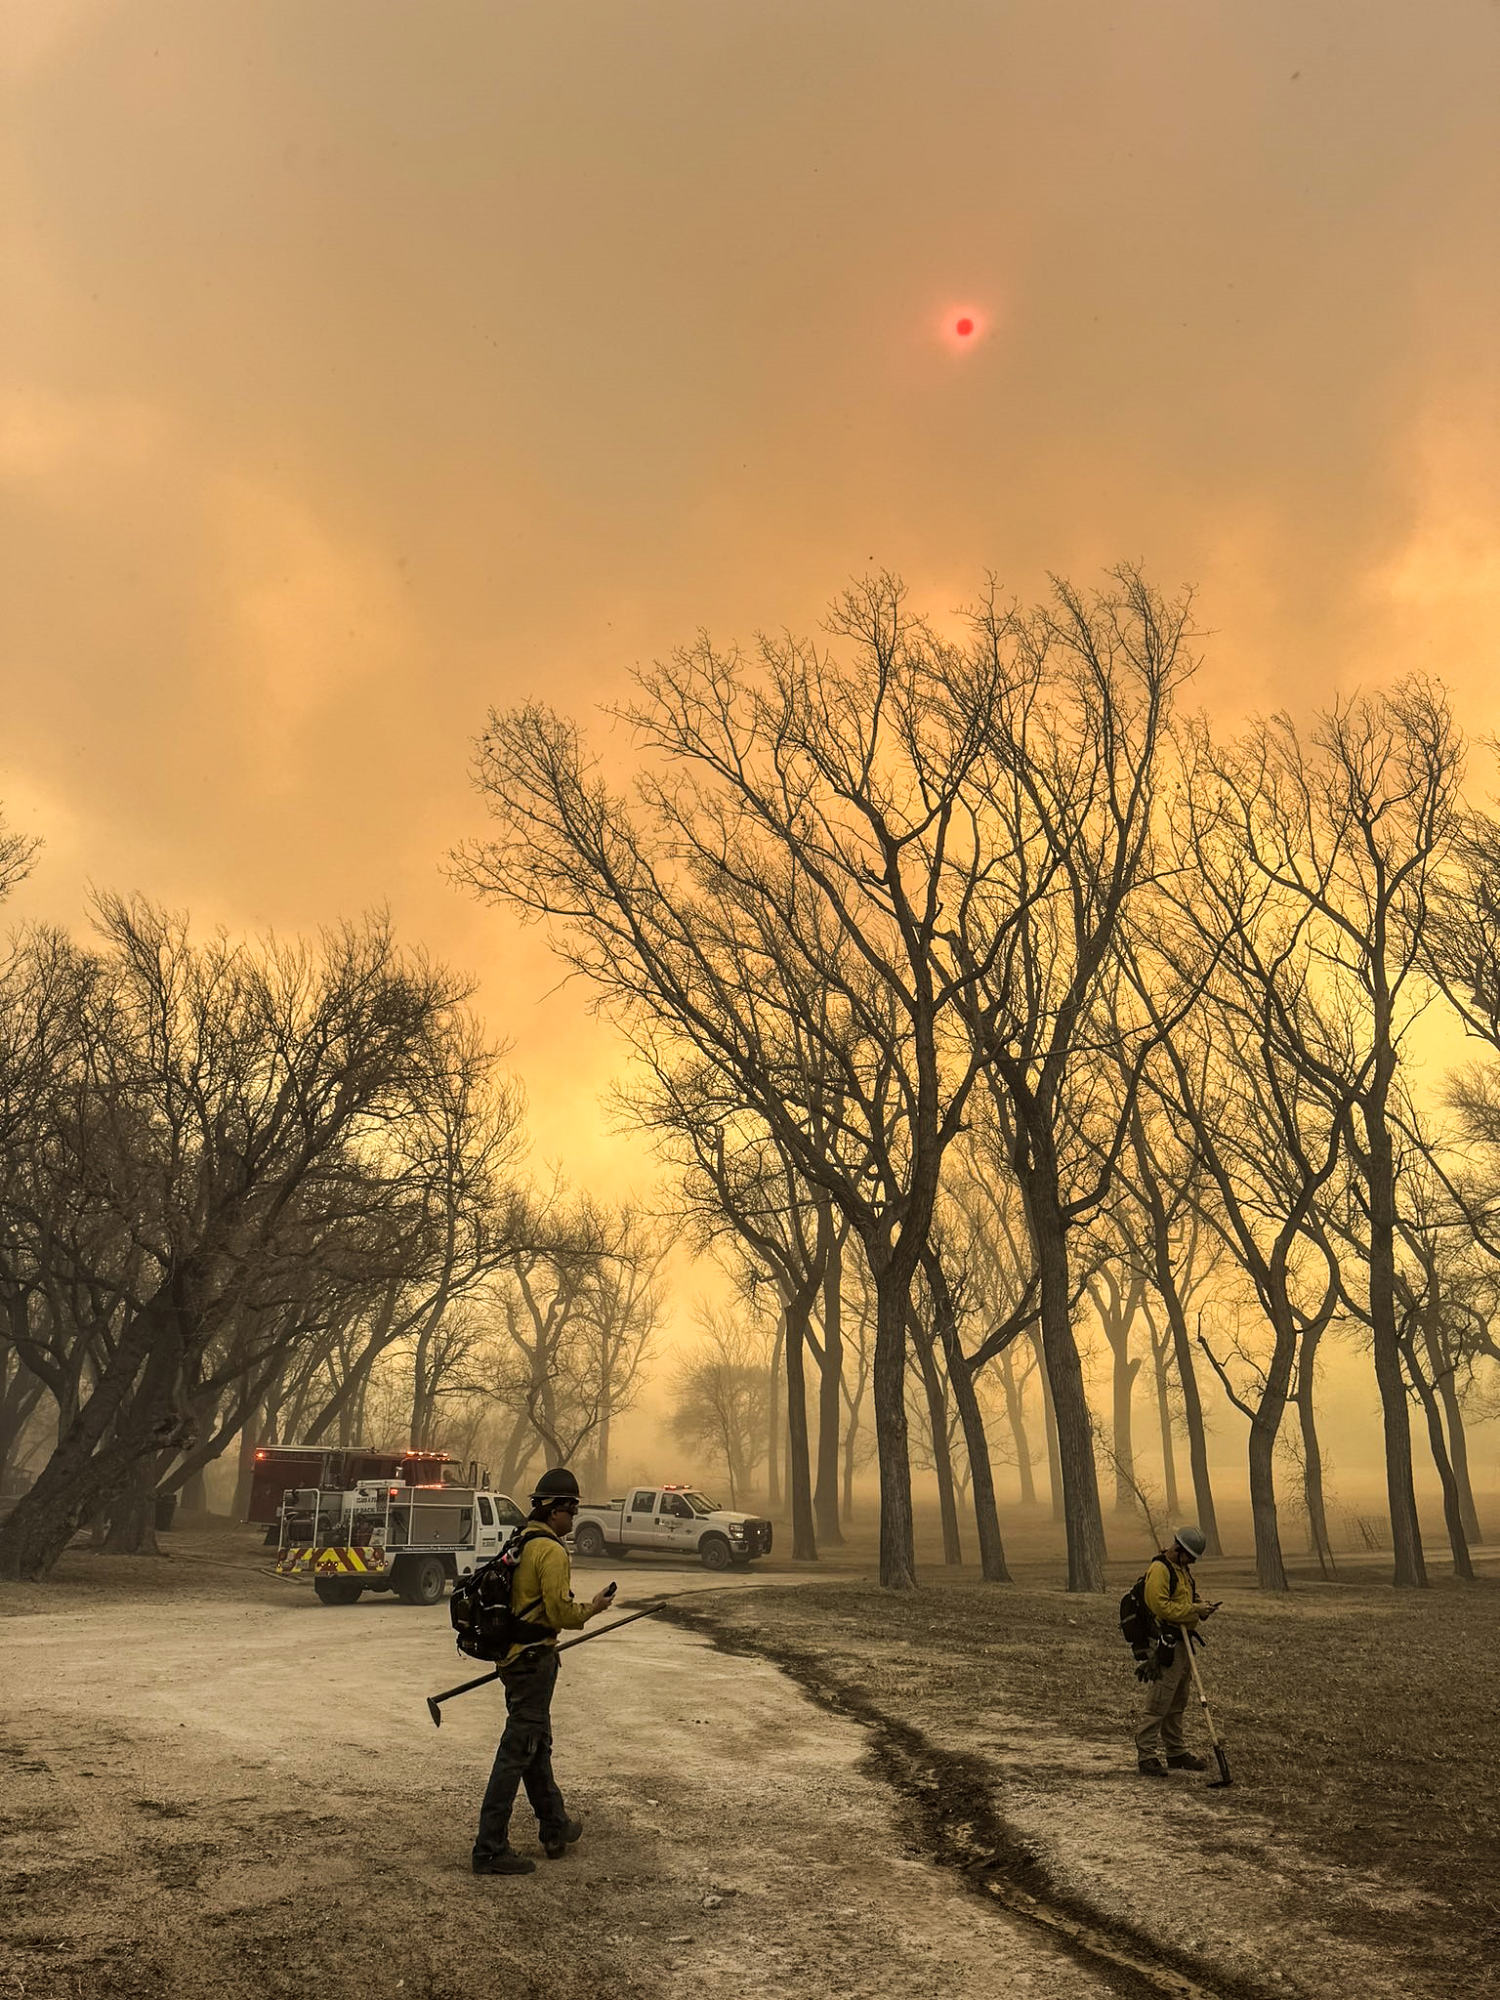 in texas, a powerful combination of dry land and high winds fuels wildfires